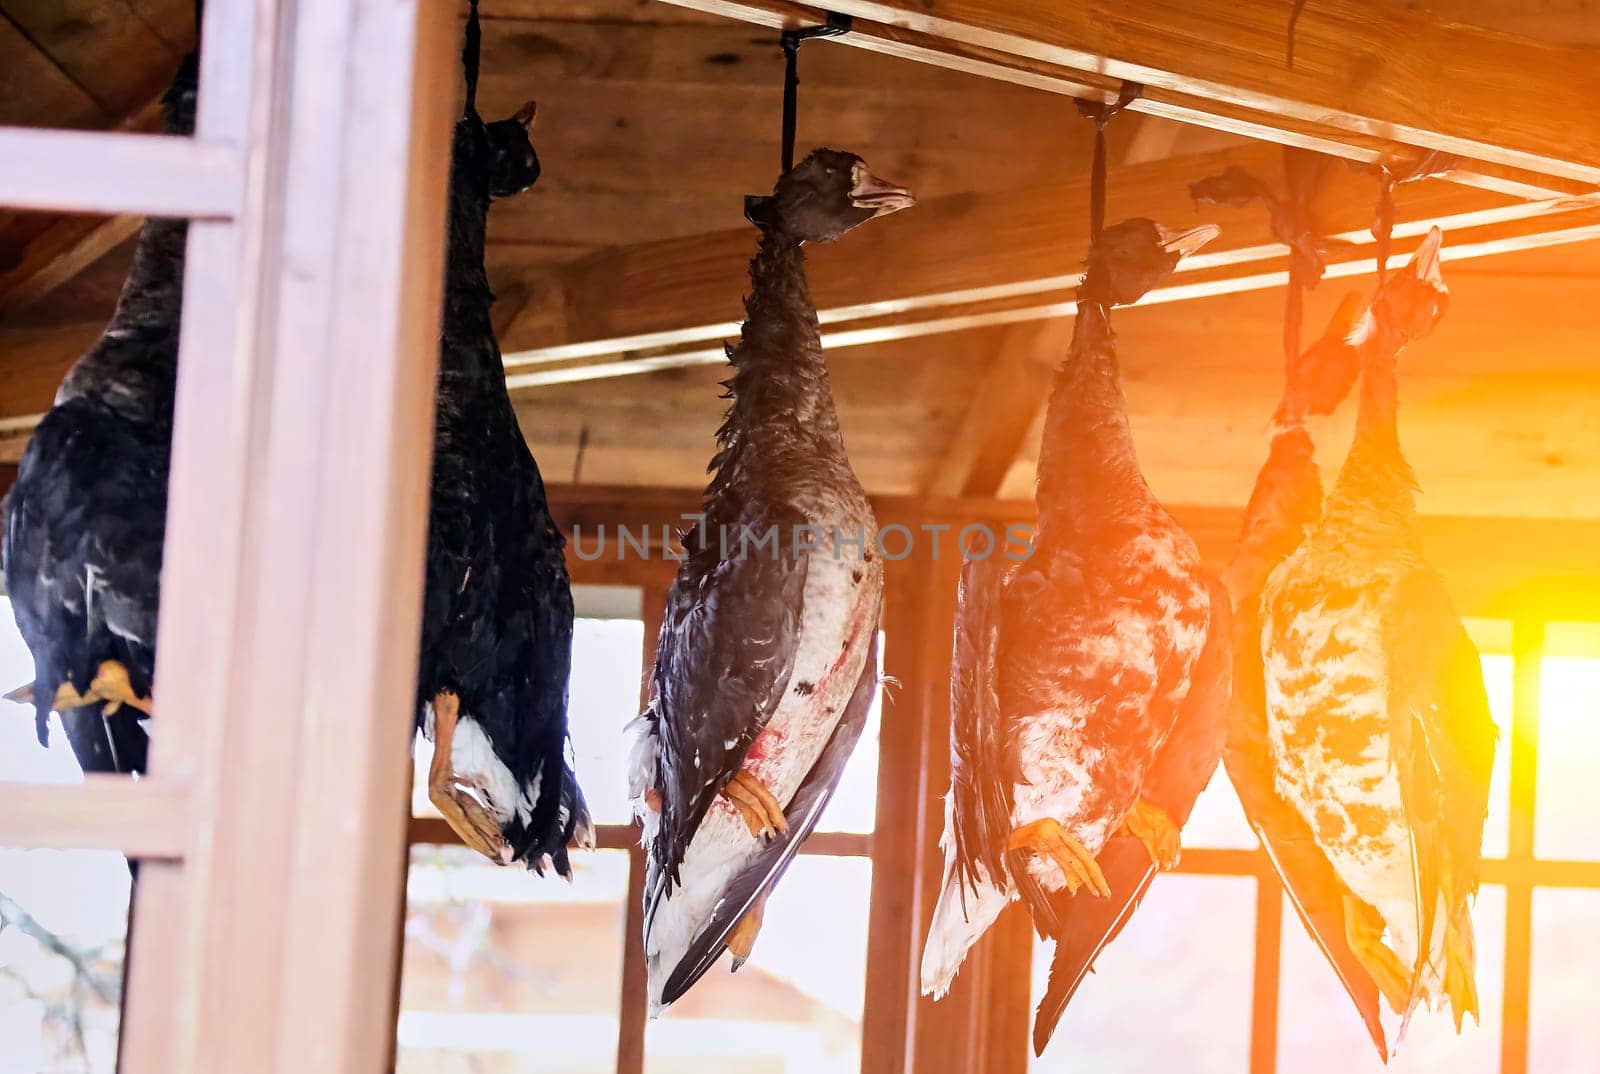 Dead geese hang under the roof of the gazebo, hanging by their necks. Hunter's trophies.